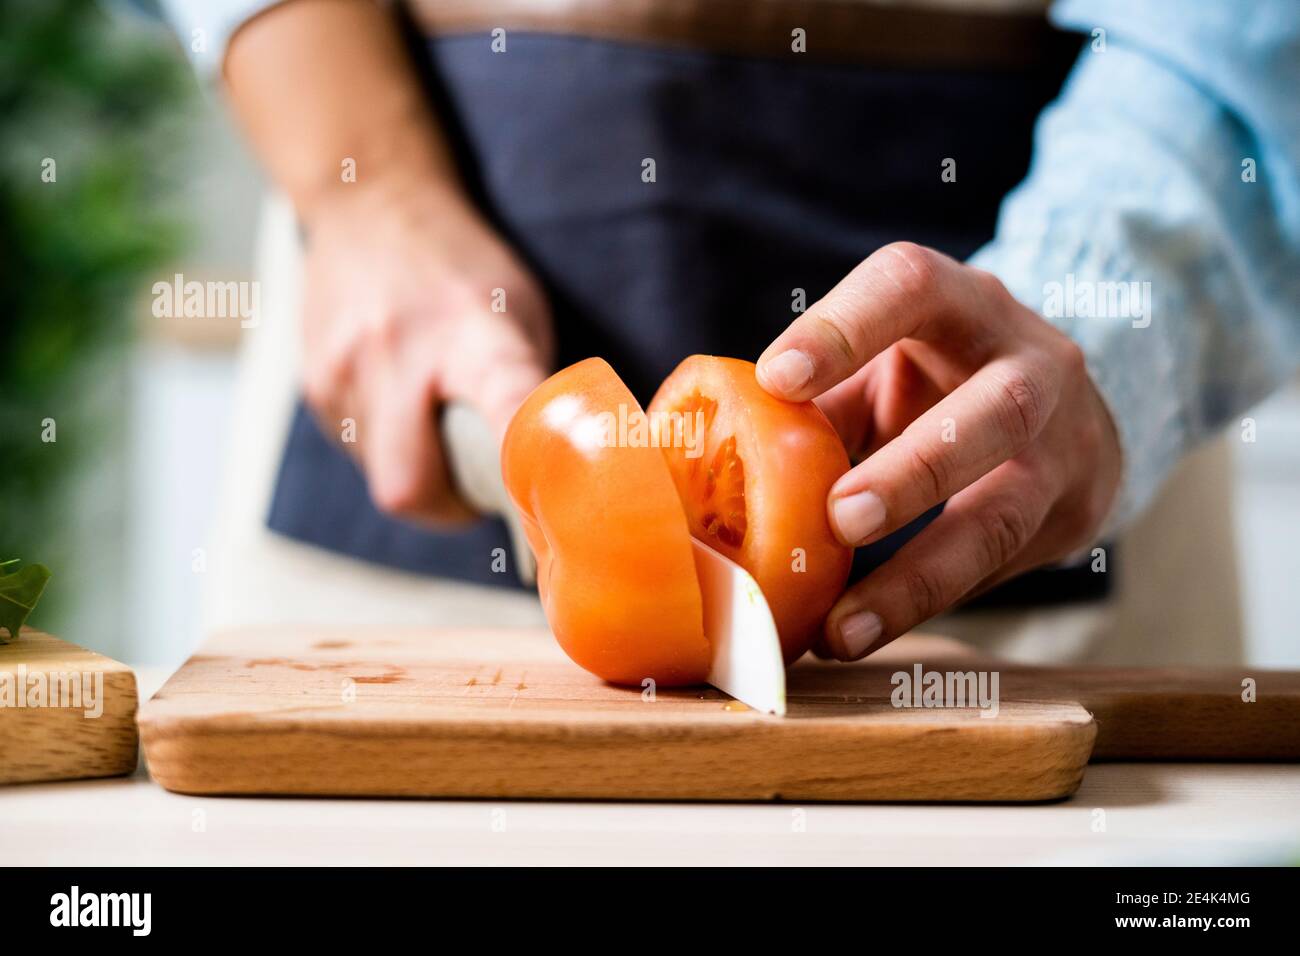 Hands of woman slicing tomato on cutting board Stock Photo